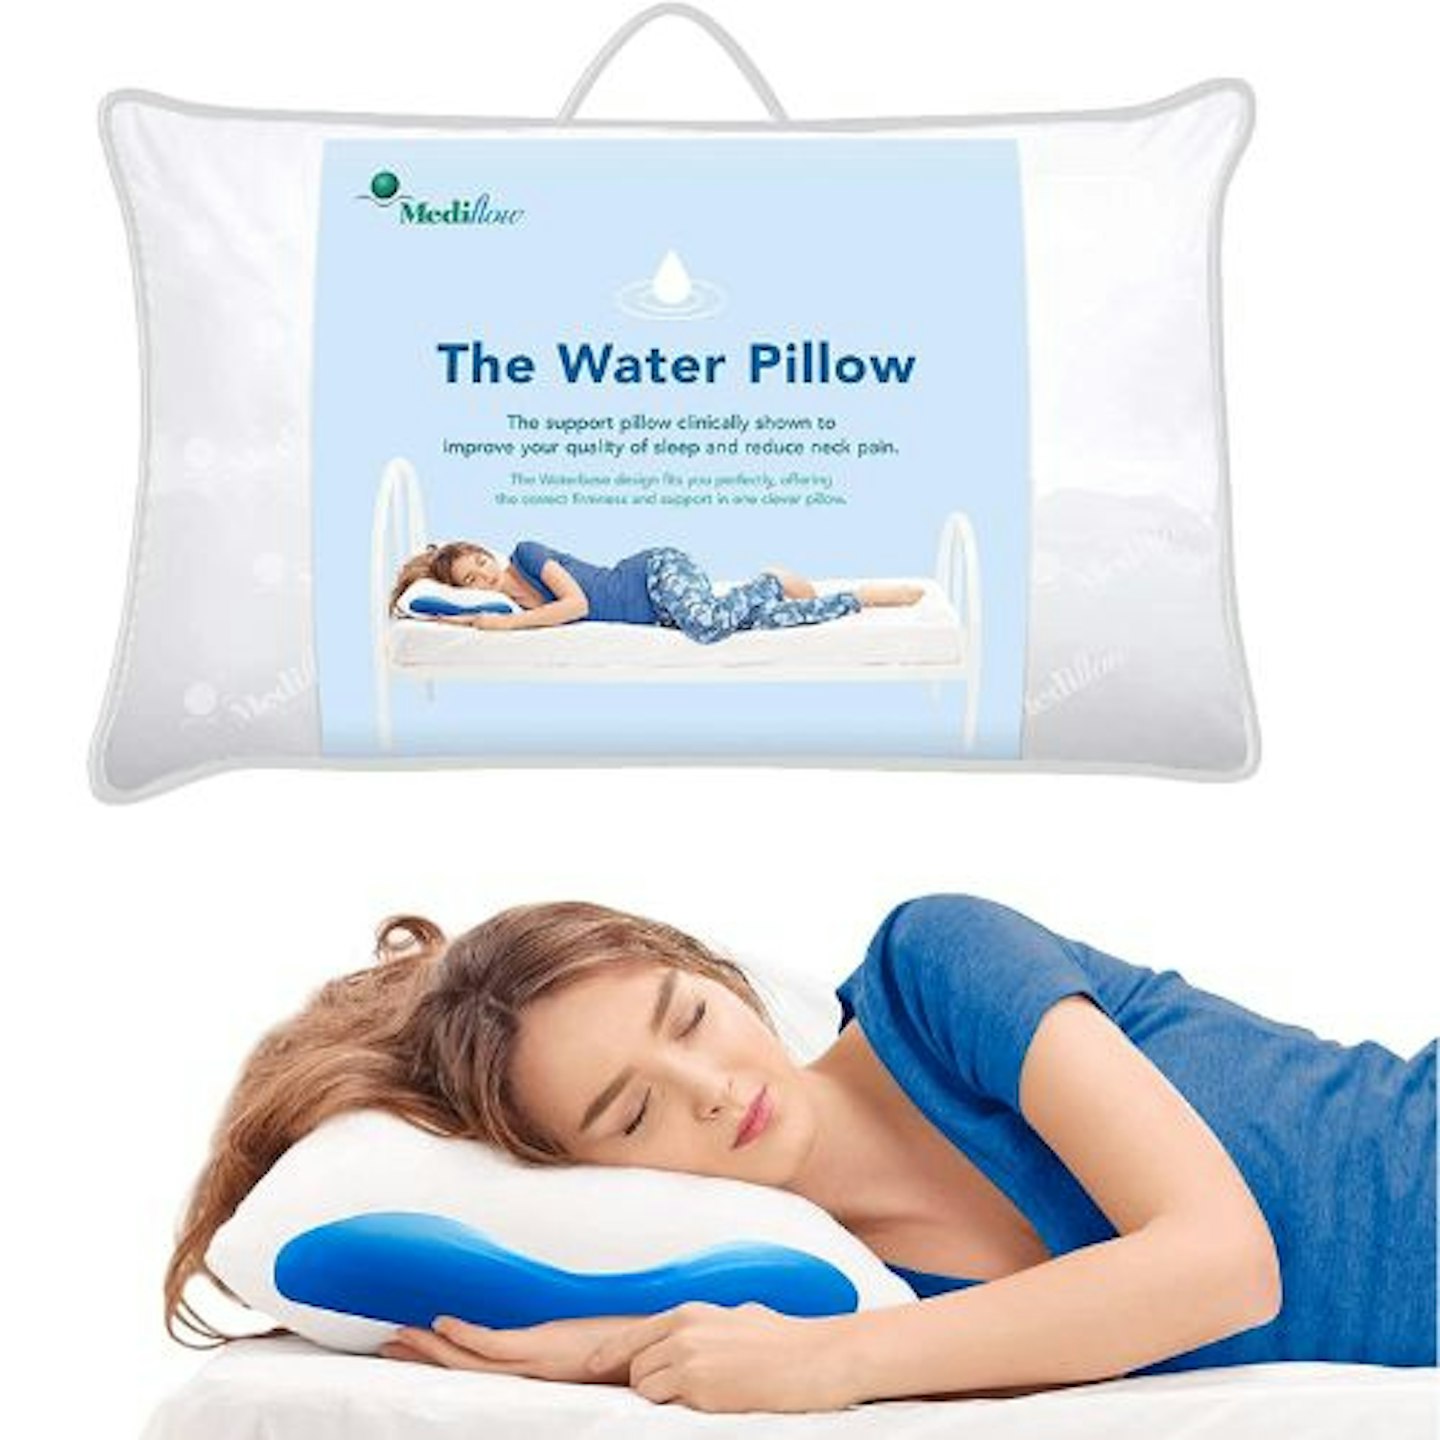 The best pillows for neck pain: Mediflow The Water Pillow